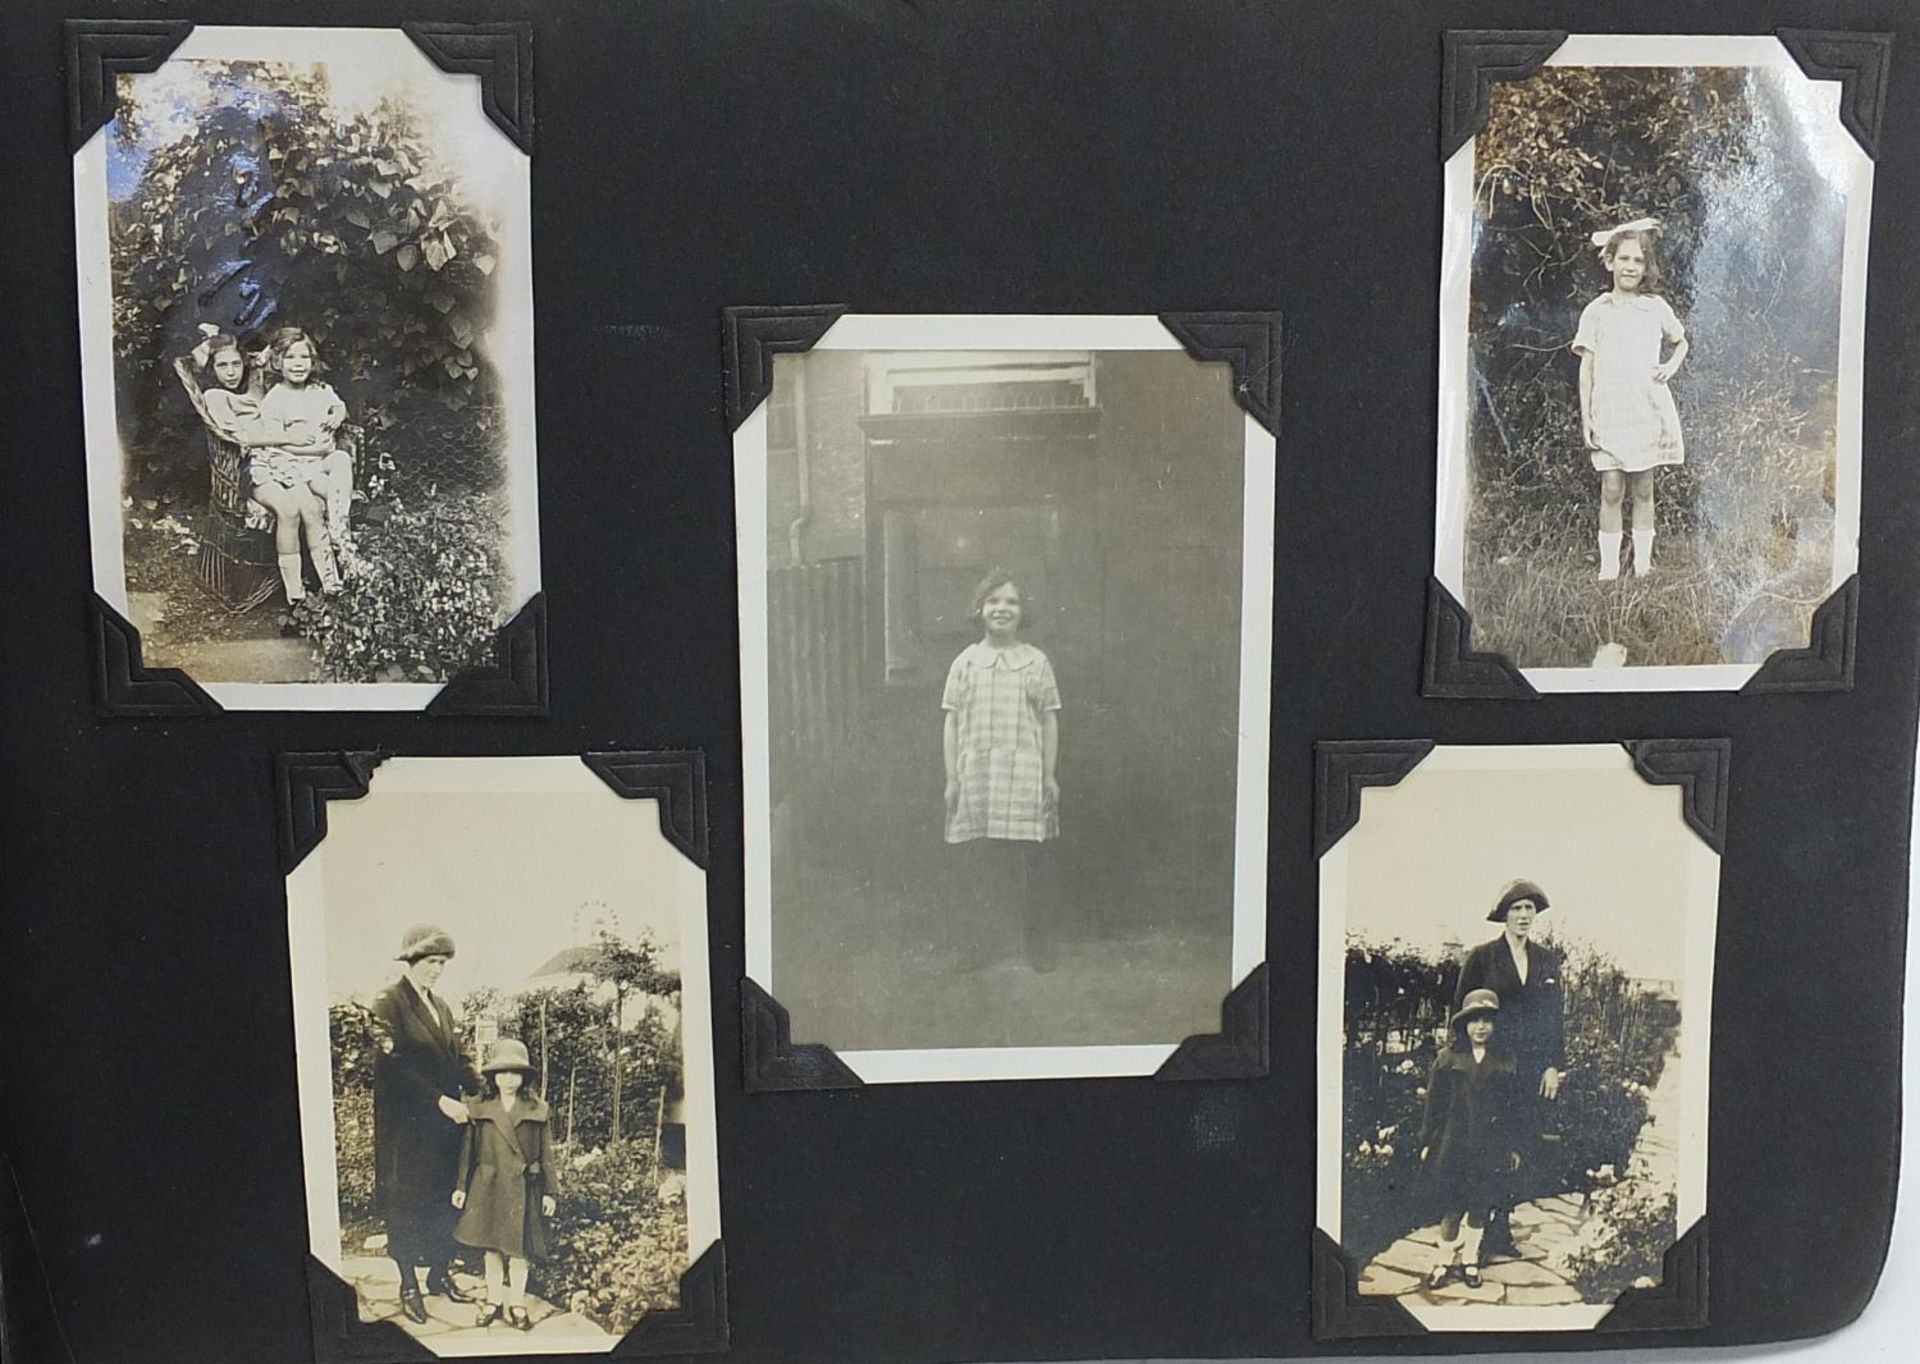 Early 20th century social history black and white photographs housed in an album, some in the Middle - Image 5 of 6